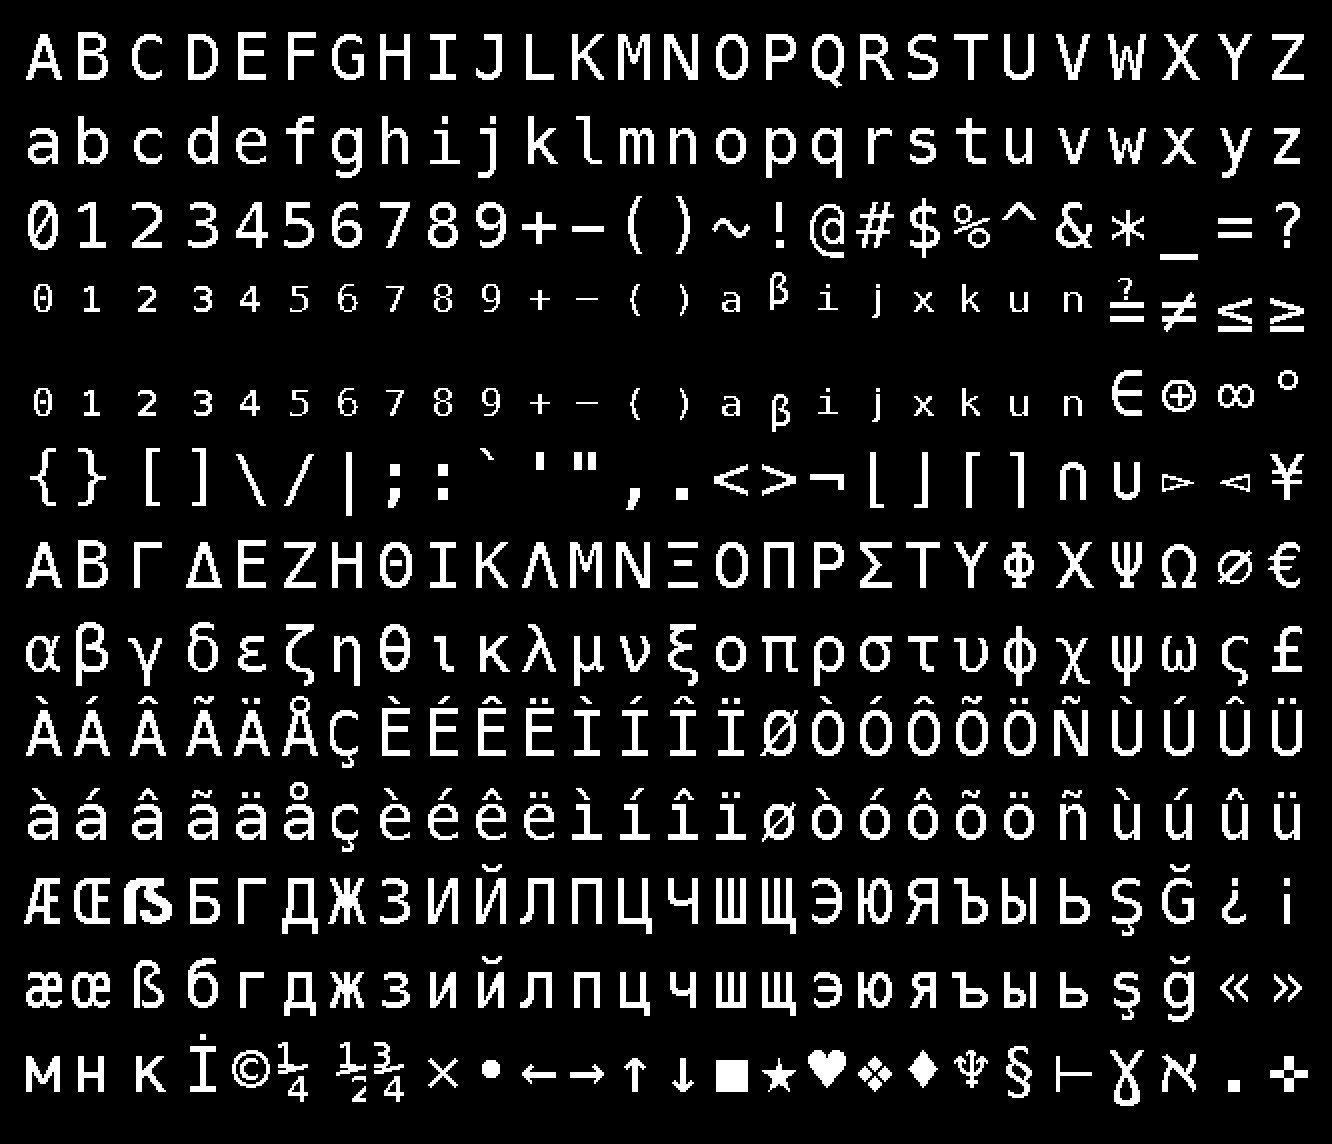 Morgan Mcguire Updated Nano Quadplay Font Sheet To Support More Languages Some Are Aliased And Map The Same Unicode Character To The Same Glyph Now I Have A Lot Of Pixelart